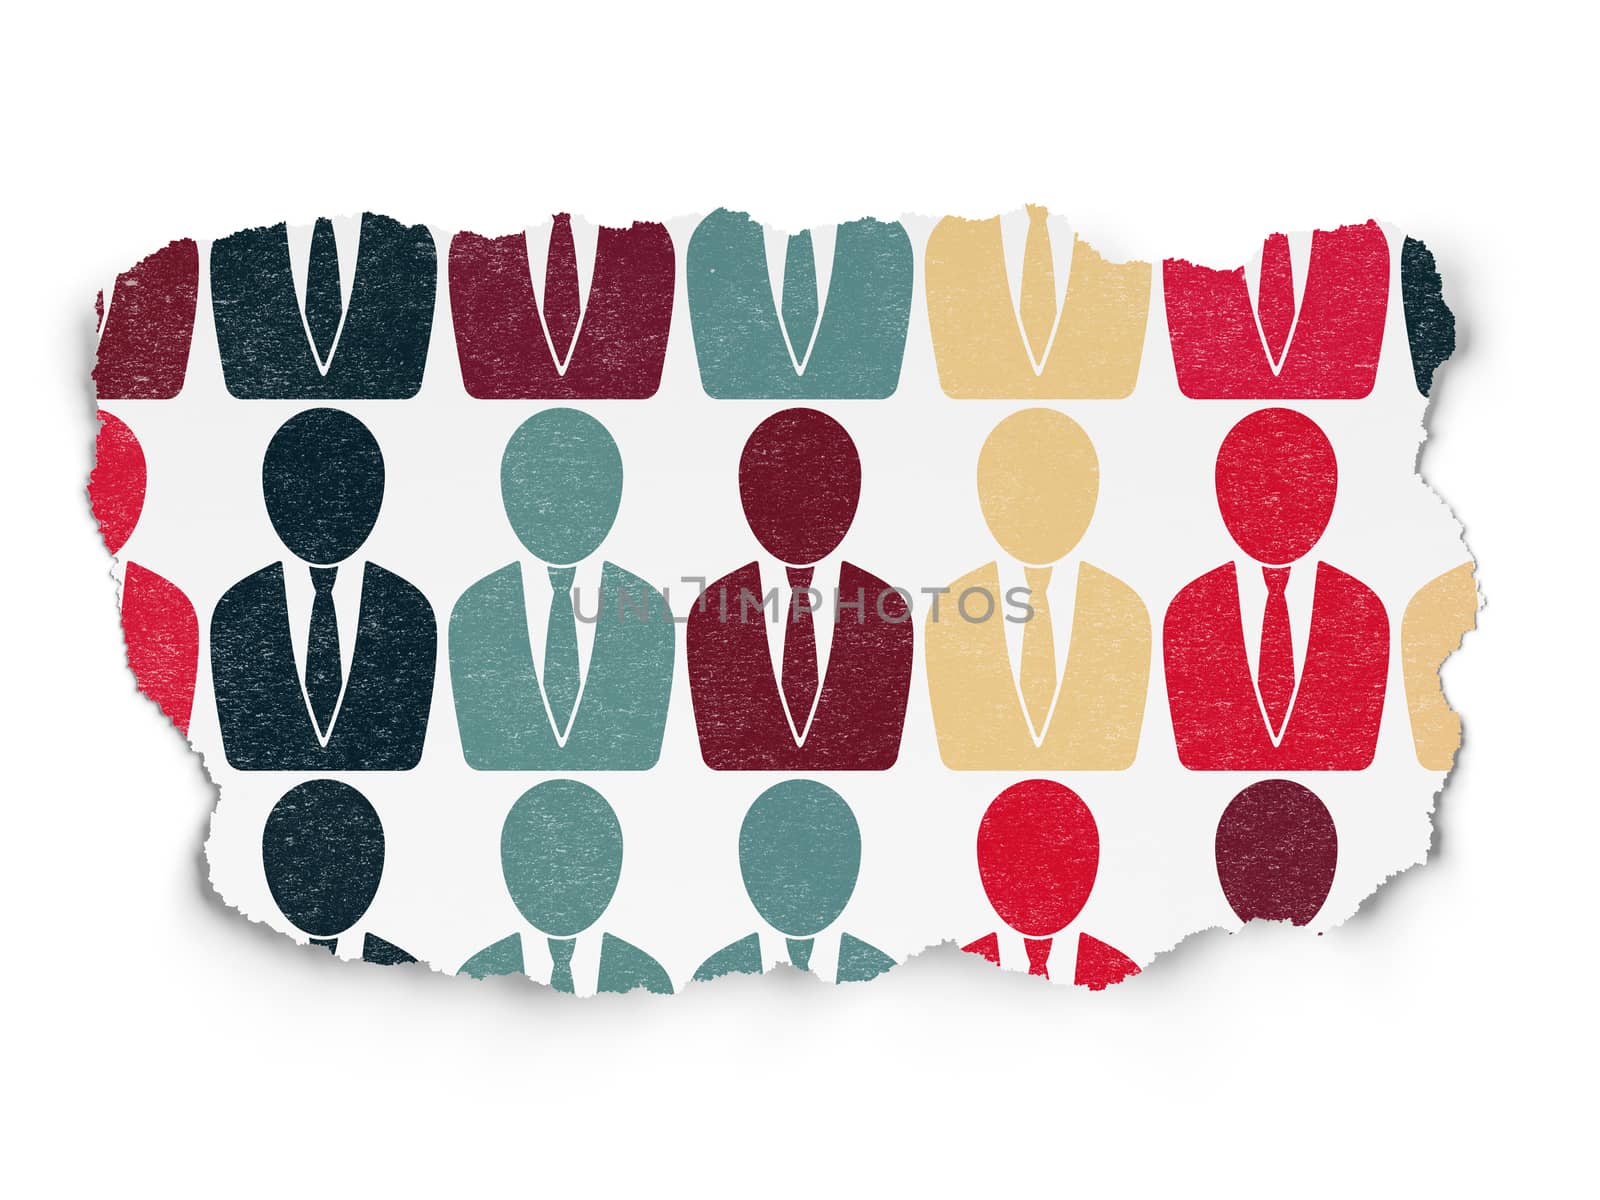 Law concept: Painted multicolor Business Man icons on Torn Paper background